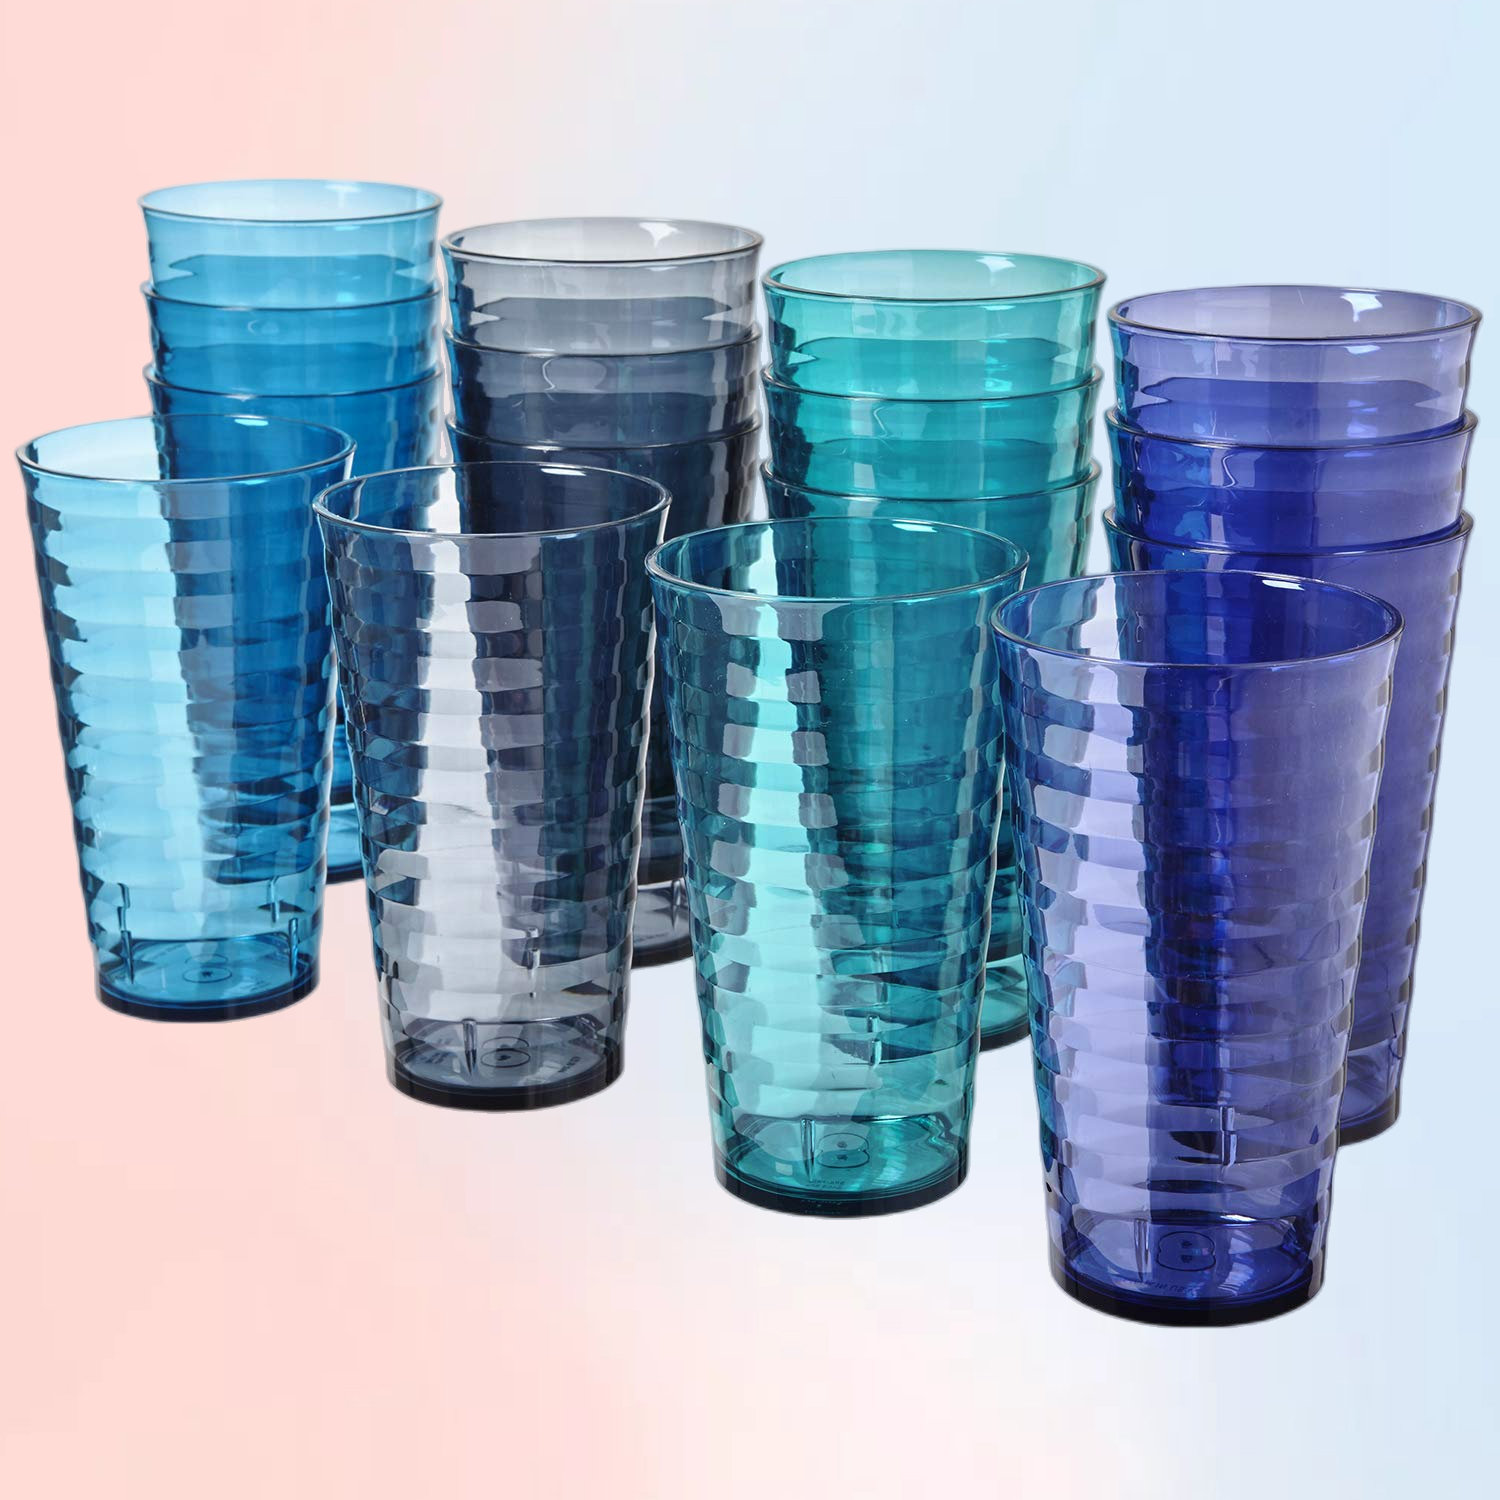 US Acrylic classic clear Plastic Reusable Drinking glasses (Set of 8) 12oz  Rocks & 16oz Water cups BPA-Free Tumblers, Made in US